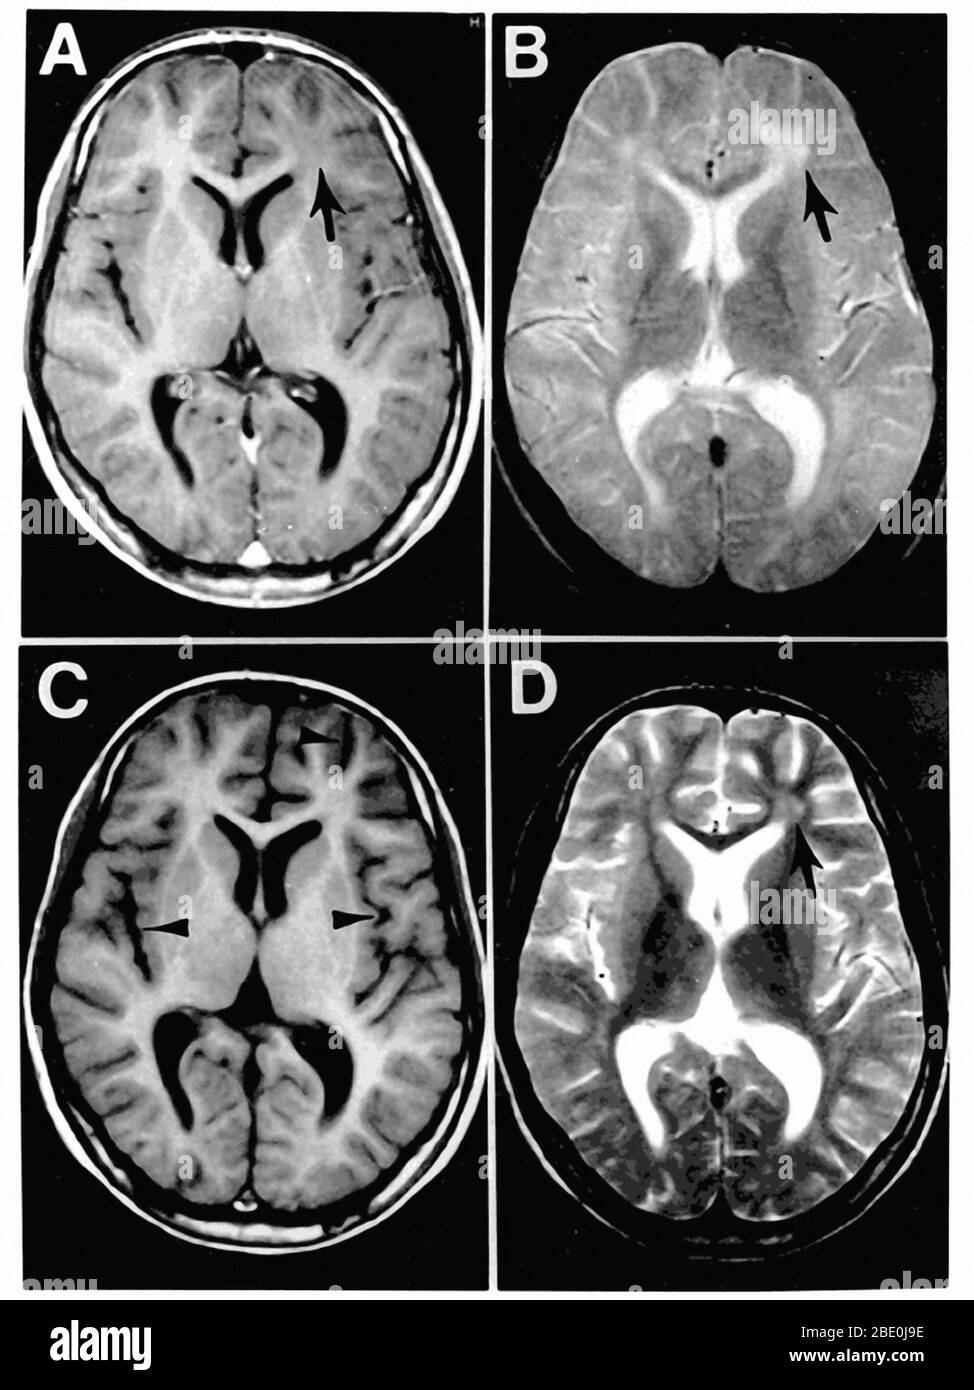 Subacute sclerosing panencephalitis (A complication of measles infection). Figure 1. MRI scans of the brain at the time of presentation in the neurology clinic (A and B) and 3 months later (C and D). Panels A and C are T1-weighted images; B and D are T2-weighted images. The initial MRI scan (A and B) reveals a focal abnormality in the subcortical white matter of the left frontal lobe, consisting of a hypointense signal on the T1-weighted image (arrow in A) and a hyperintense signal on the T2-weighted image (arrow in B). In the follow-up scan, the focal abnormality in the left frontal lobe is l Stock Photo